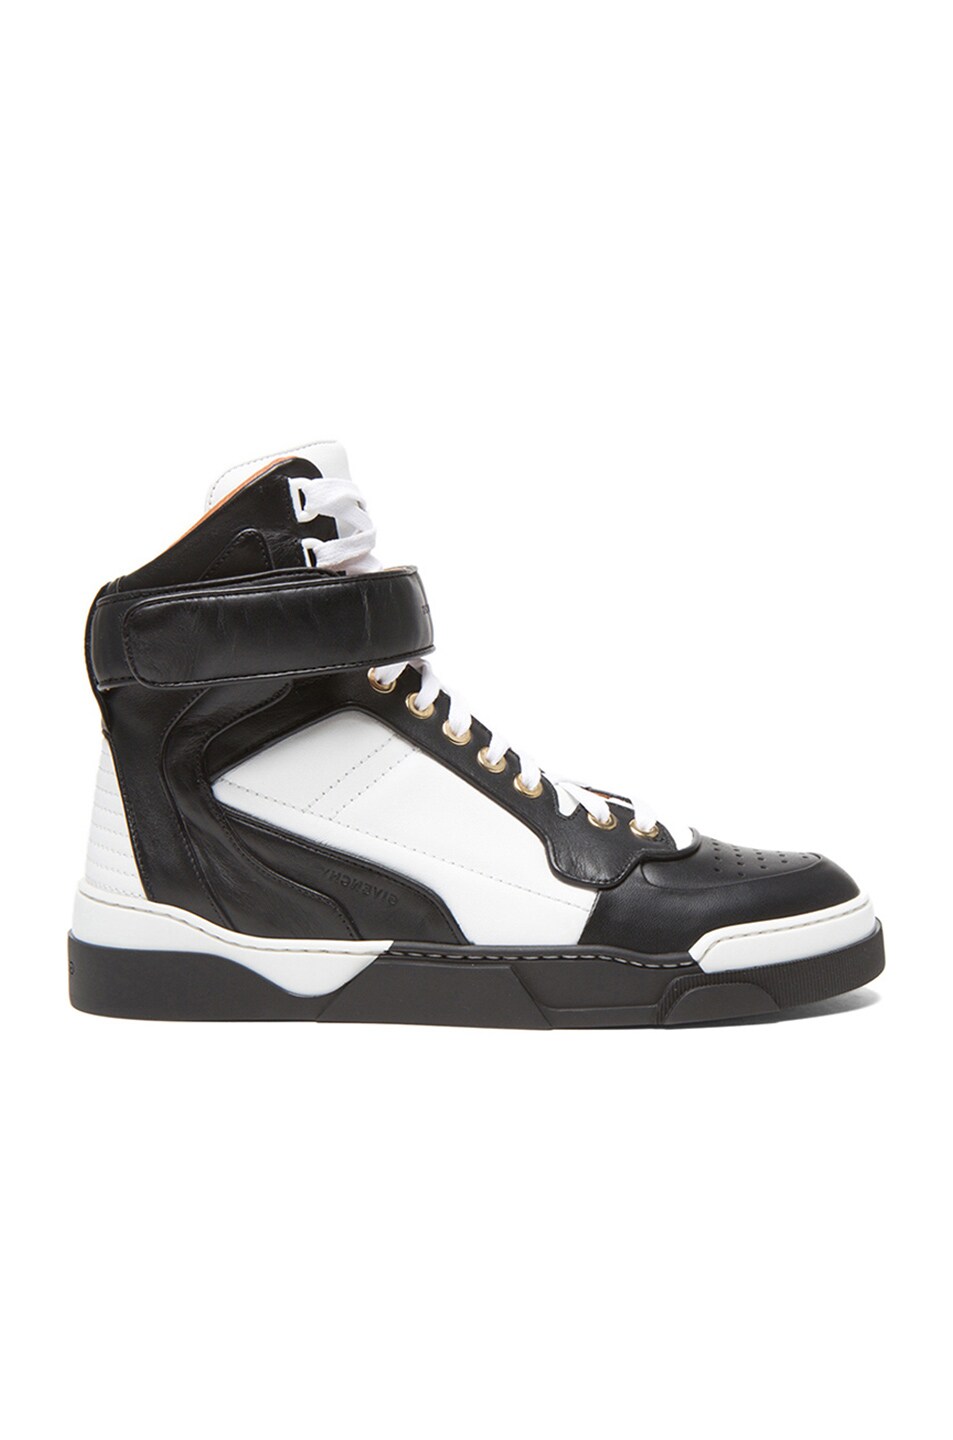 Image 1 of Givenchy High Top Calfskin Leather Sneakers in Black & White